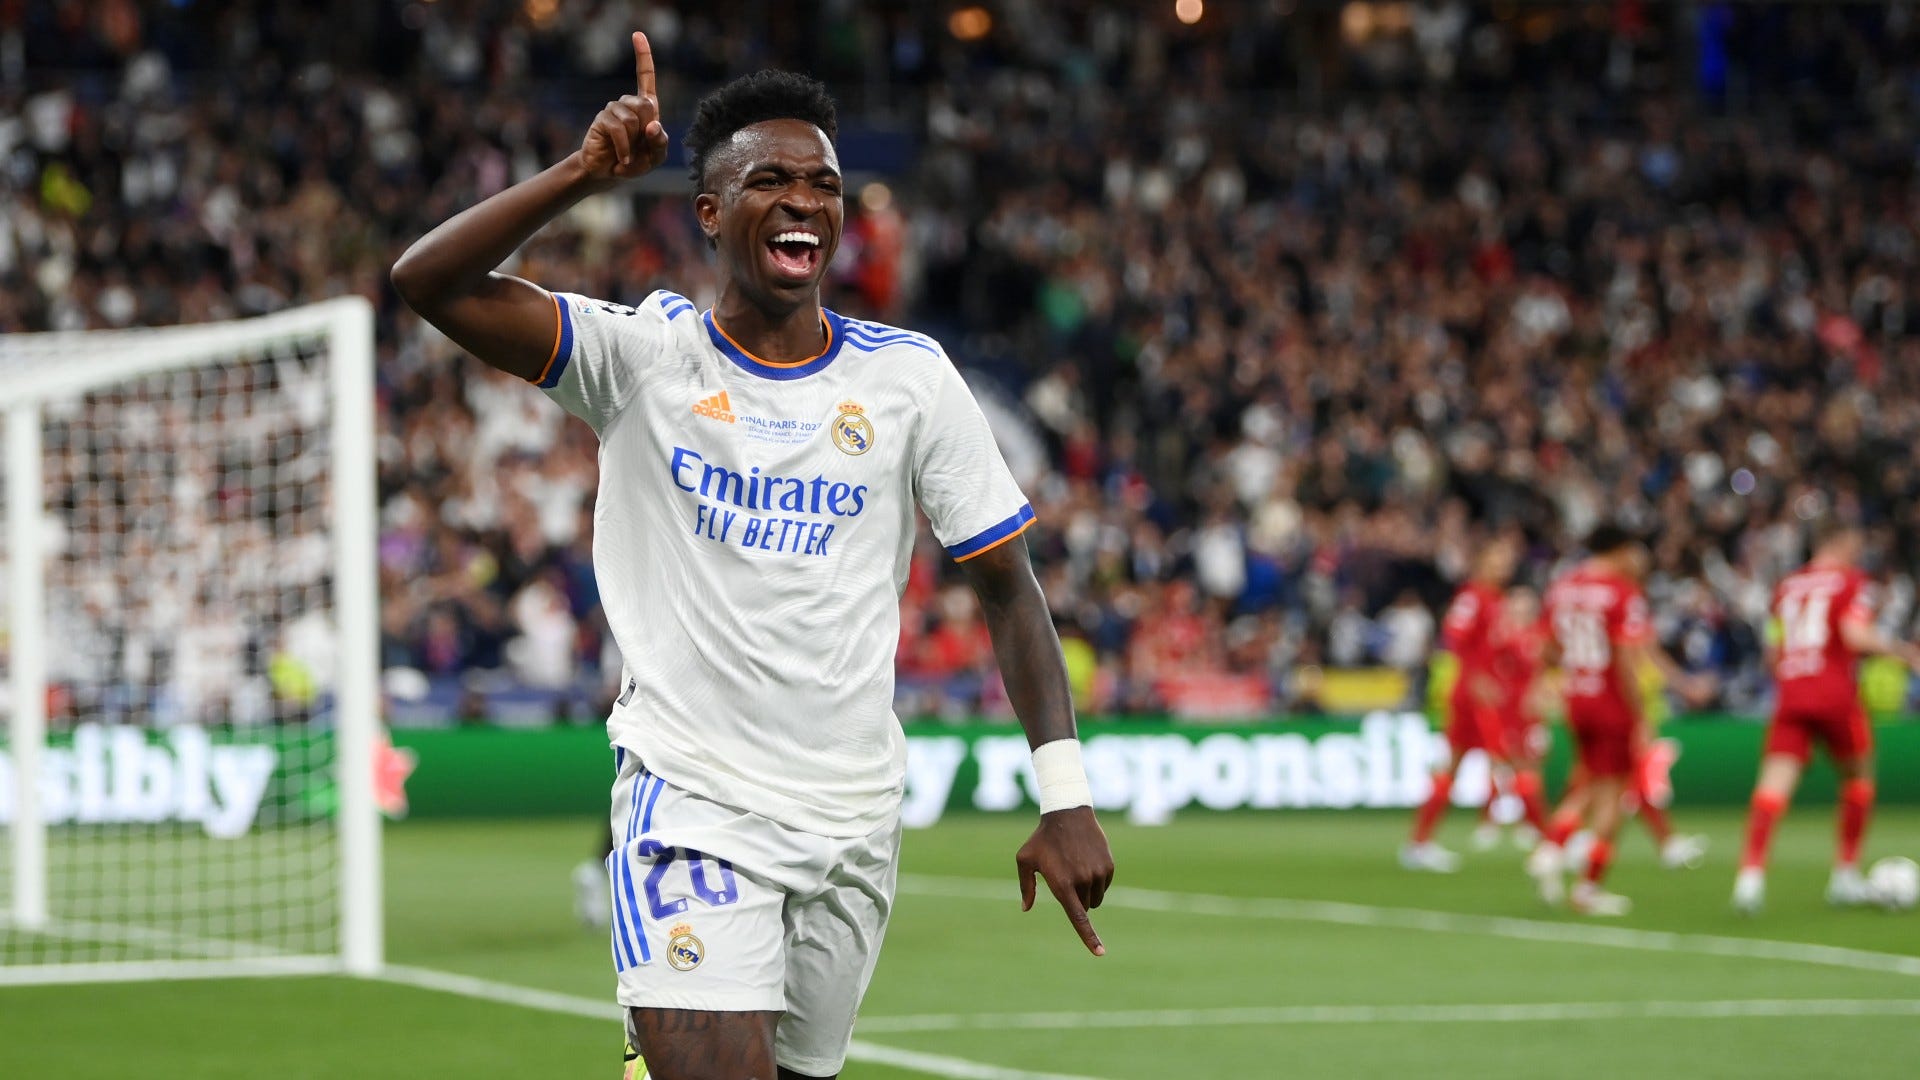  Vinicius Junior celebrates a goal for Real Madrid in the Champions League wearing a white jersey with blue trim and white shorts, surrounded by opposing players in red jerseys.